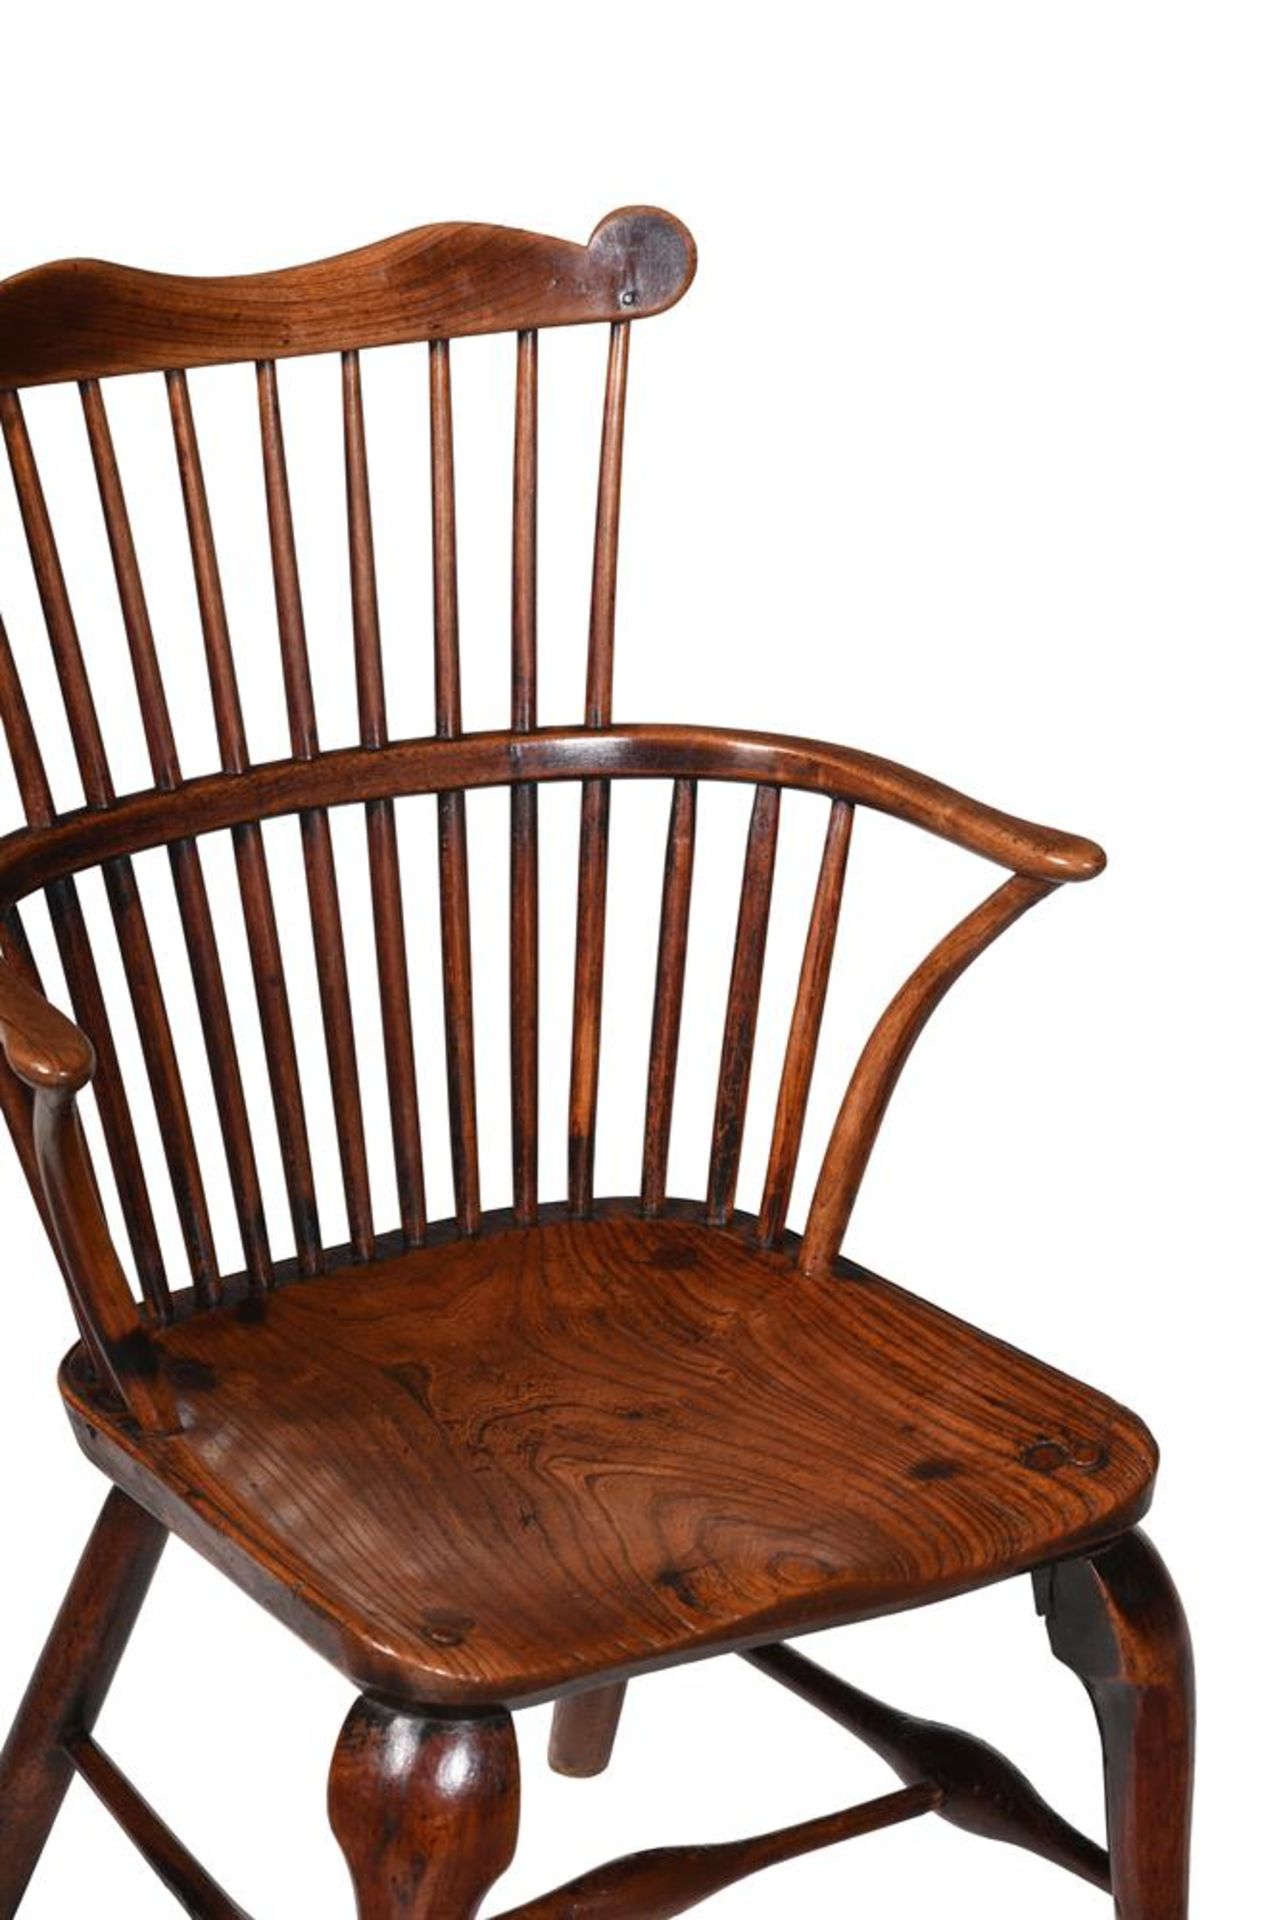 A GEORGE III ASH ELM AND FRUITWOOD WINDSOR ARMCHAIR - Image 2 of 2